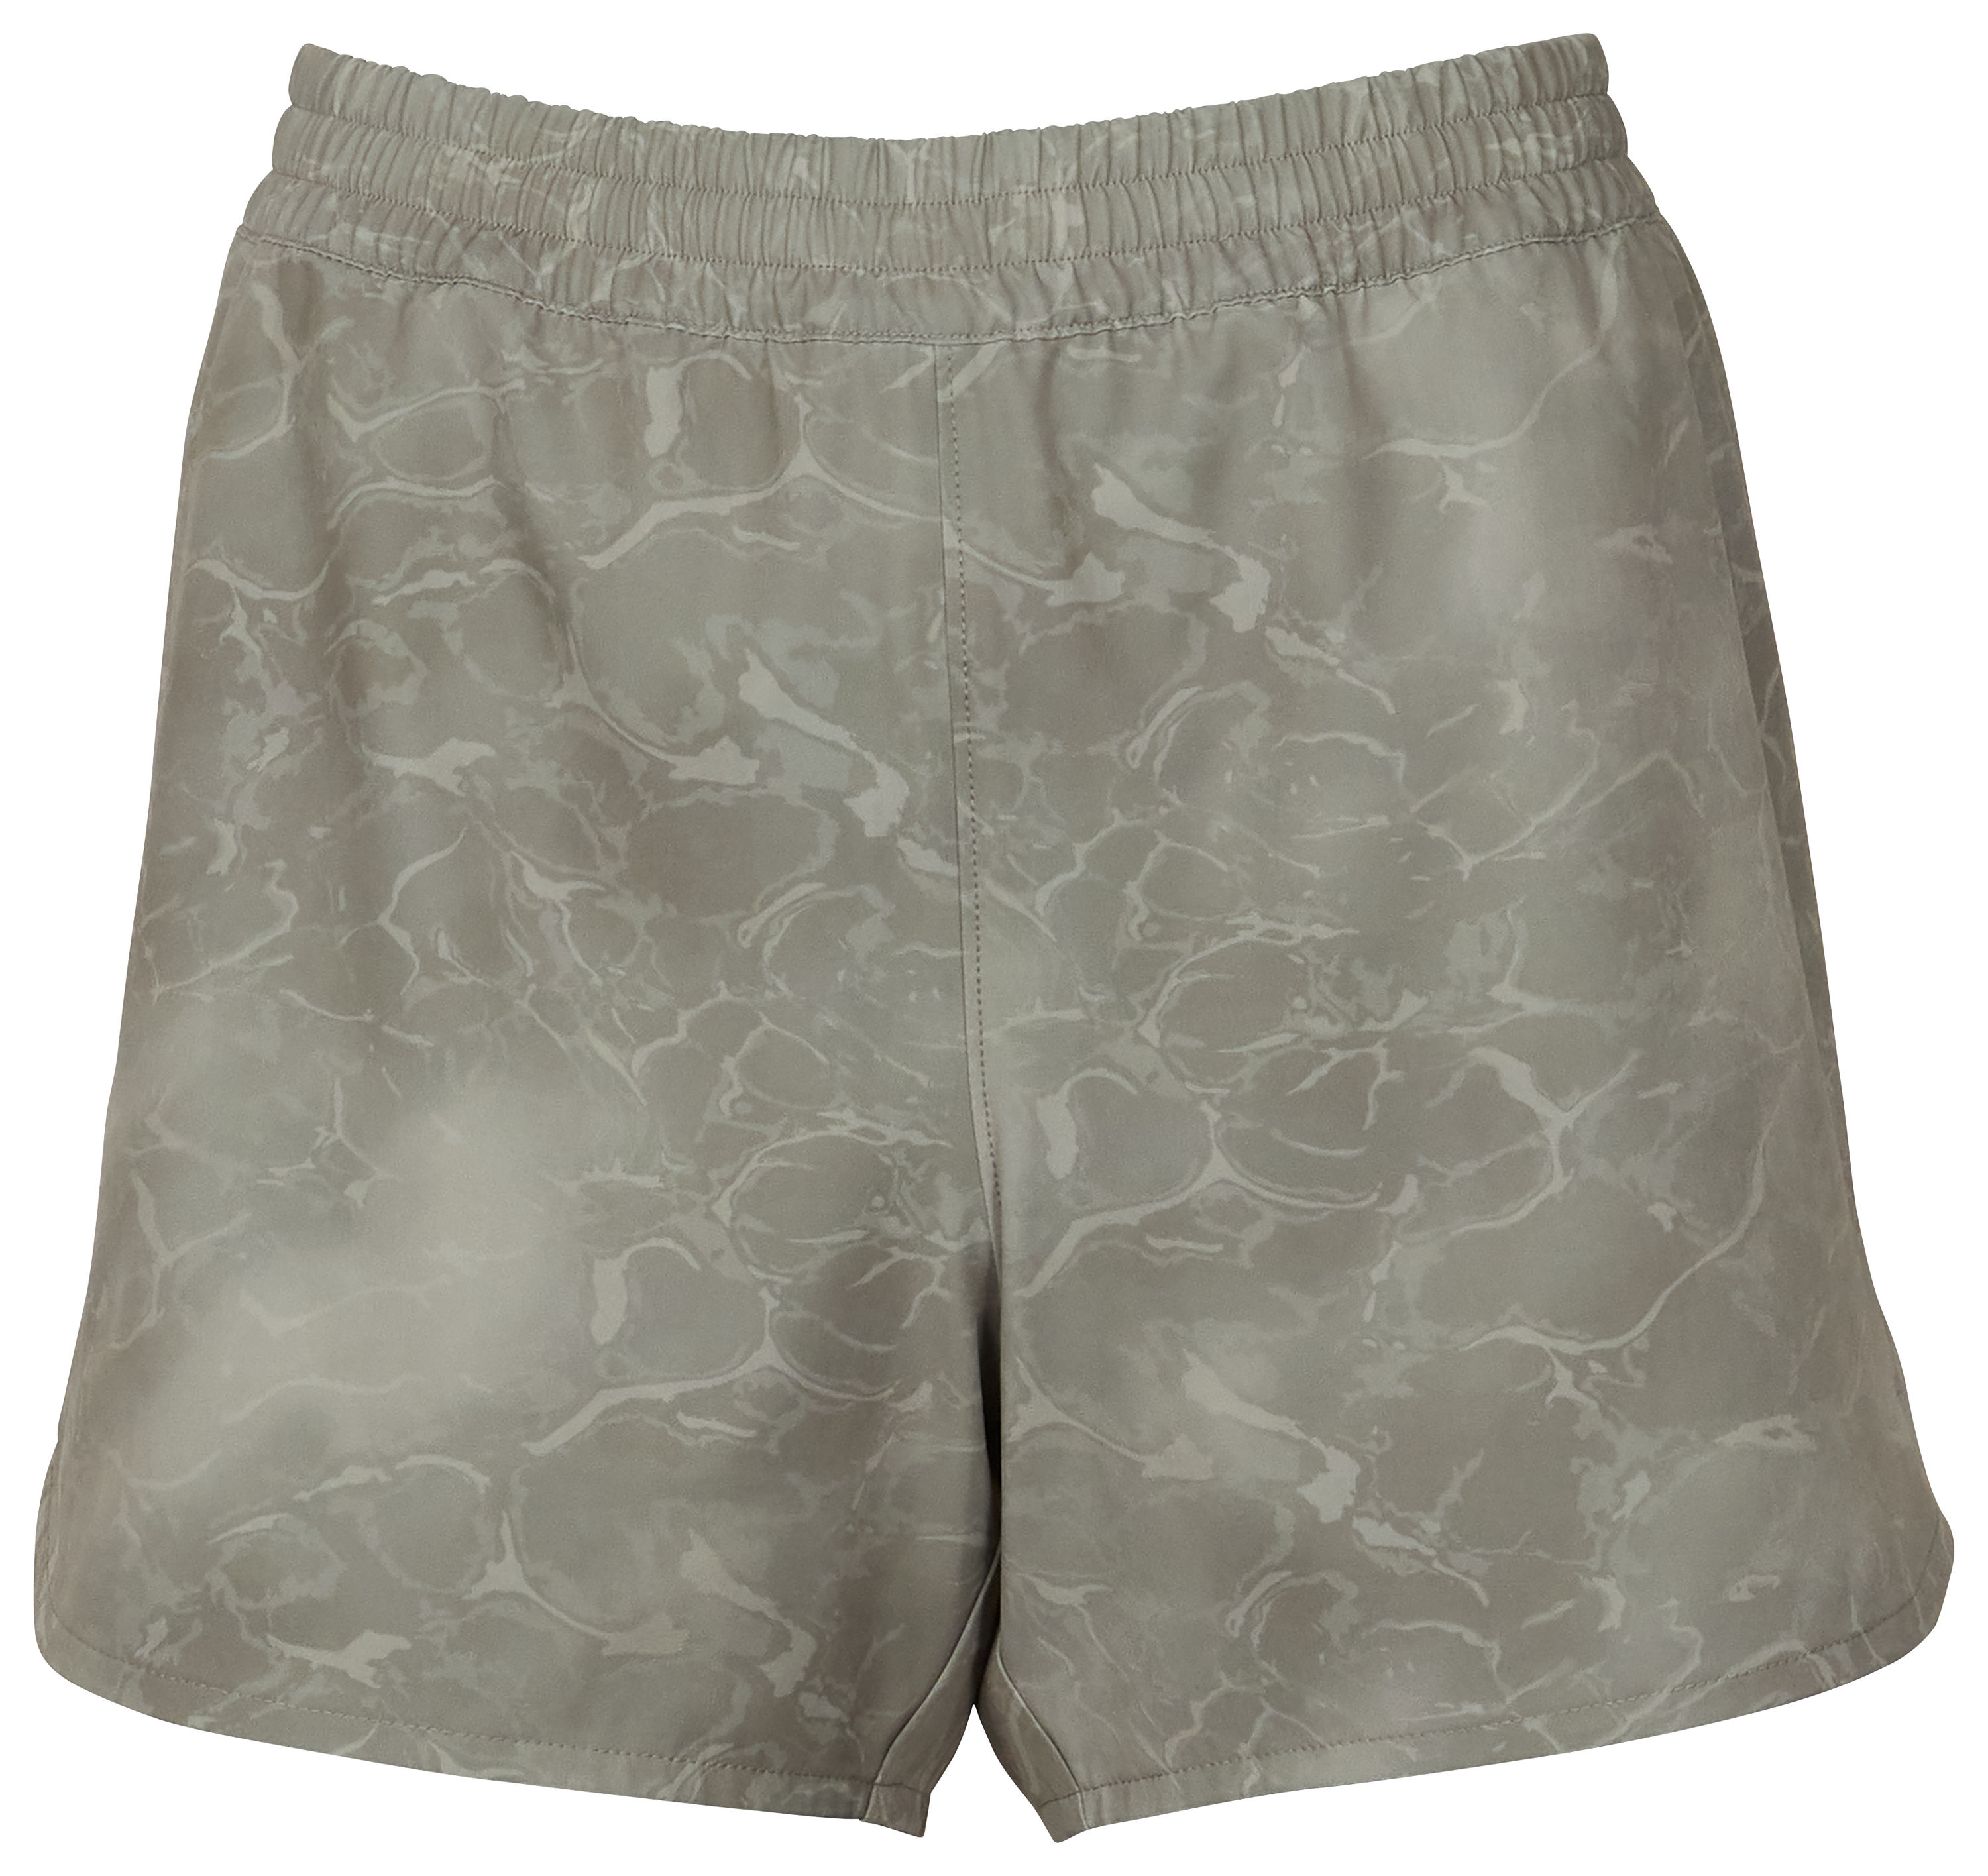 World Wide Sportsman Charter Print Pull-On Shorts for Ladies - Gray Water Camo - M